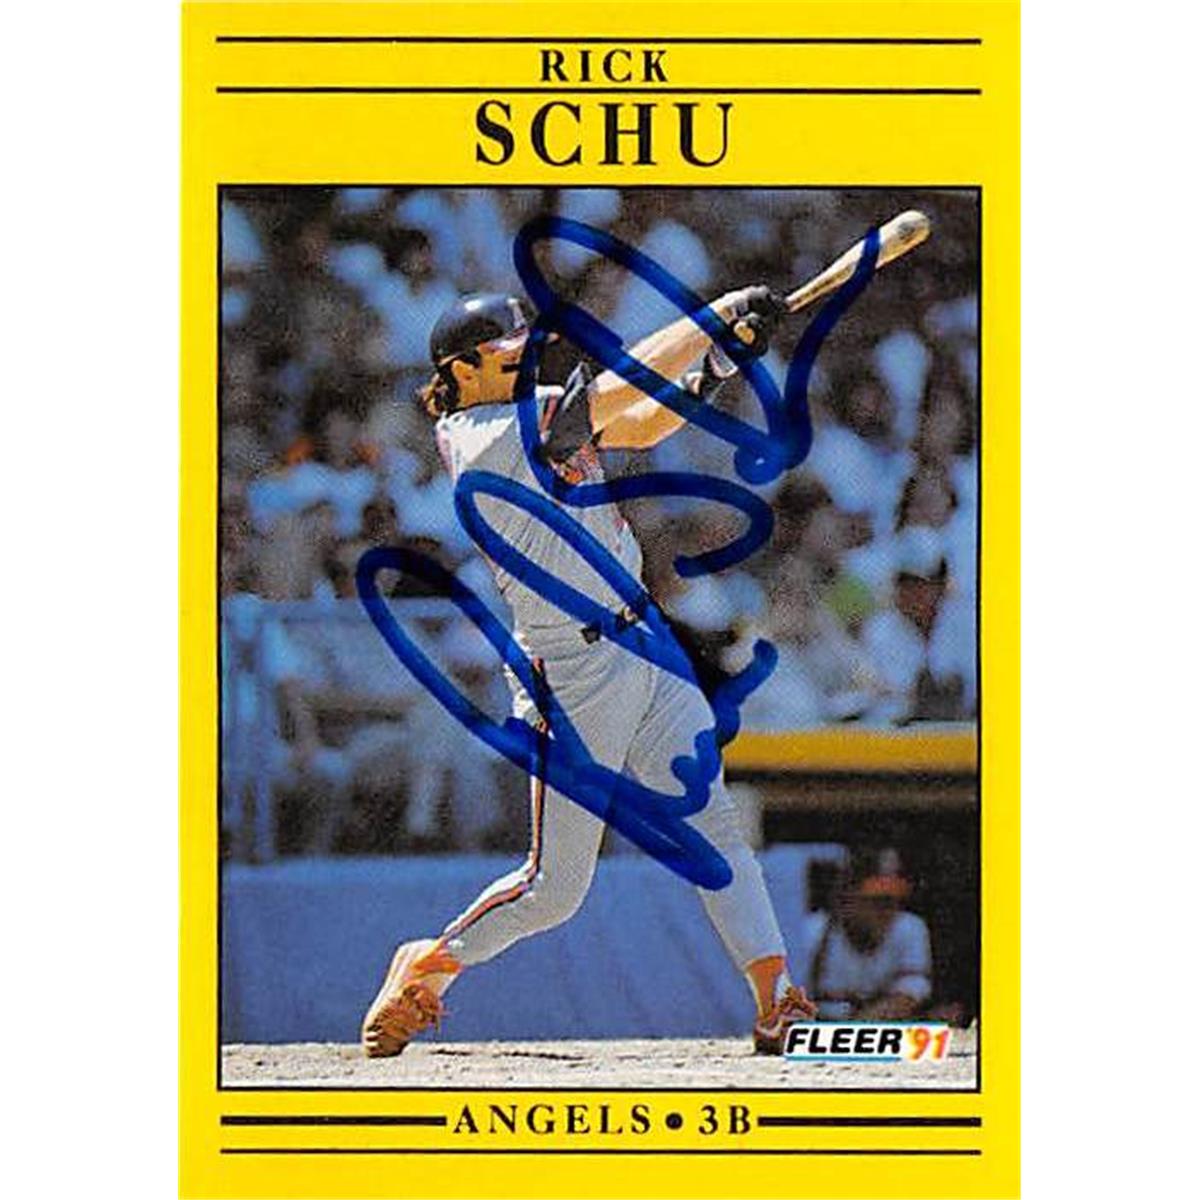 Picture of Autograph Warehouse 366225 Rick Schu Autographed Baseball Card - California Angels 1991 Fleer No.326